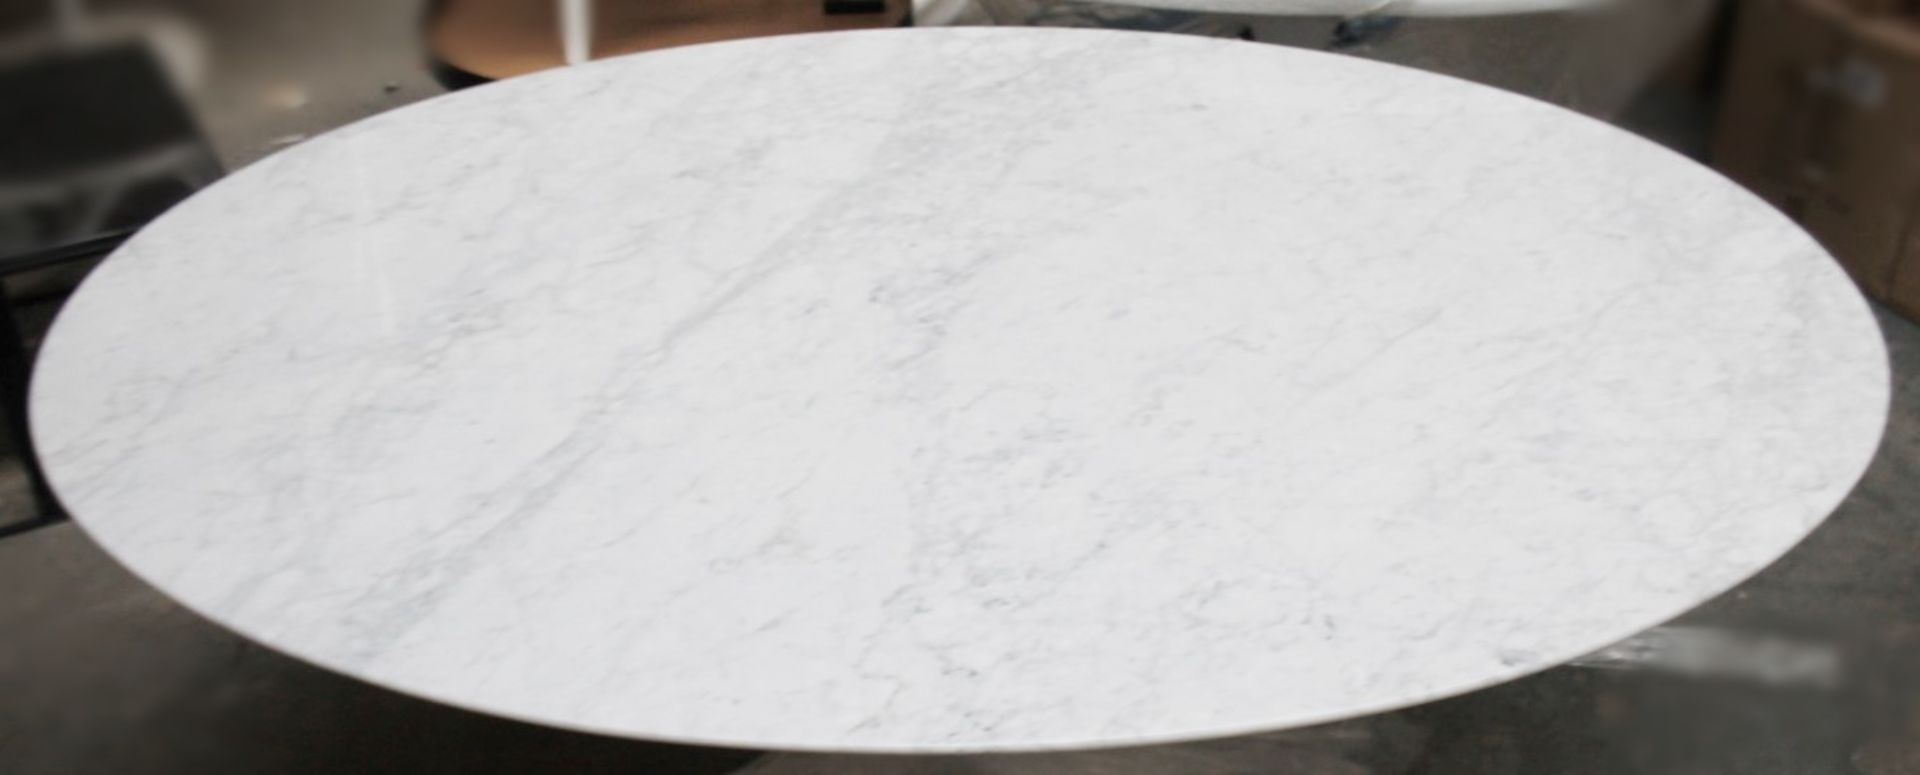 1 x Eero Saarinen Inspired Large Oval Carrara Marble-Topped Dining Table - H74cm x W150 x D120cm - Image 4 of 6